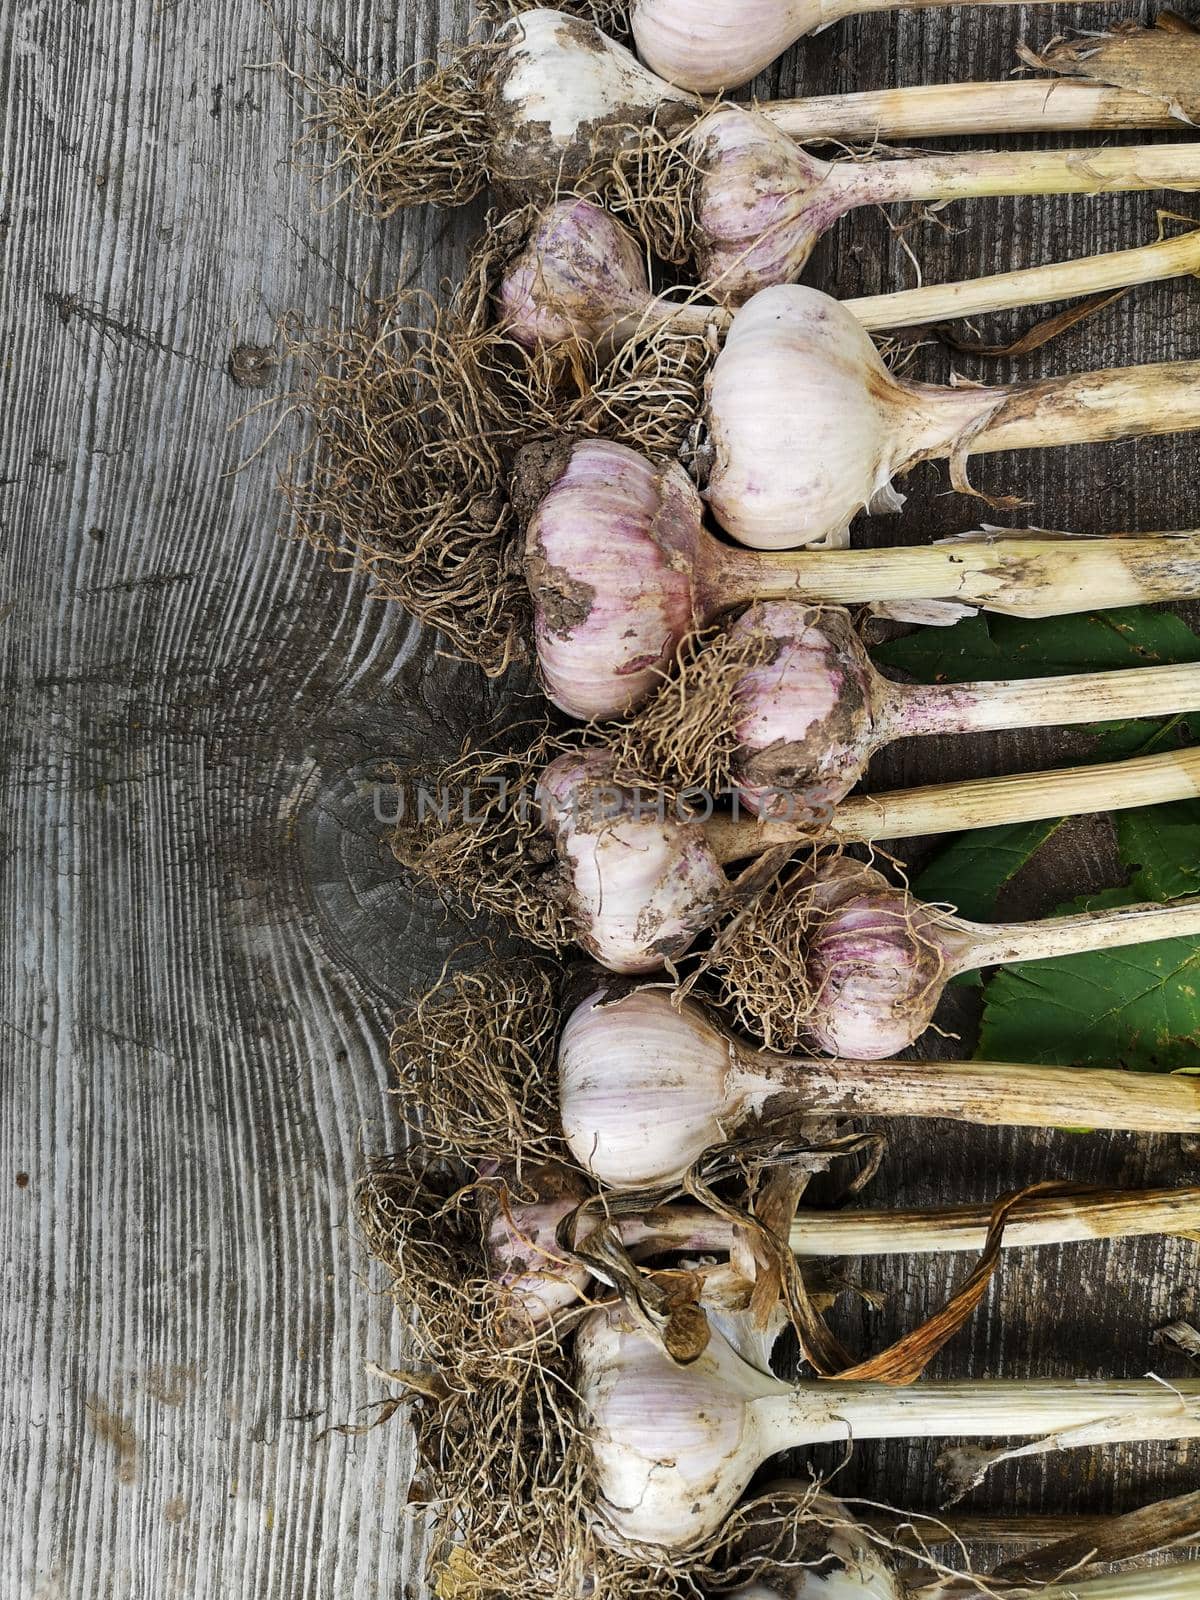 Freshly Picked Garlic Bulbs on a wooden and Dirt Background. organic farming concept.